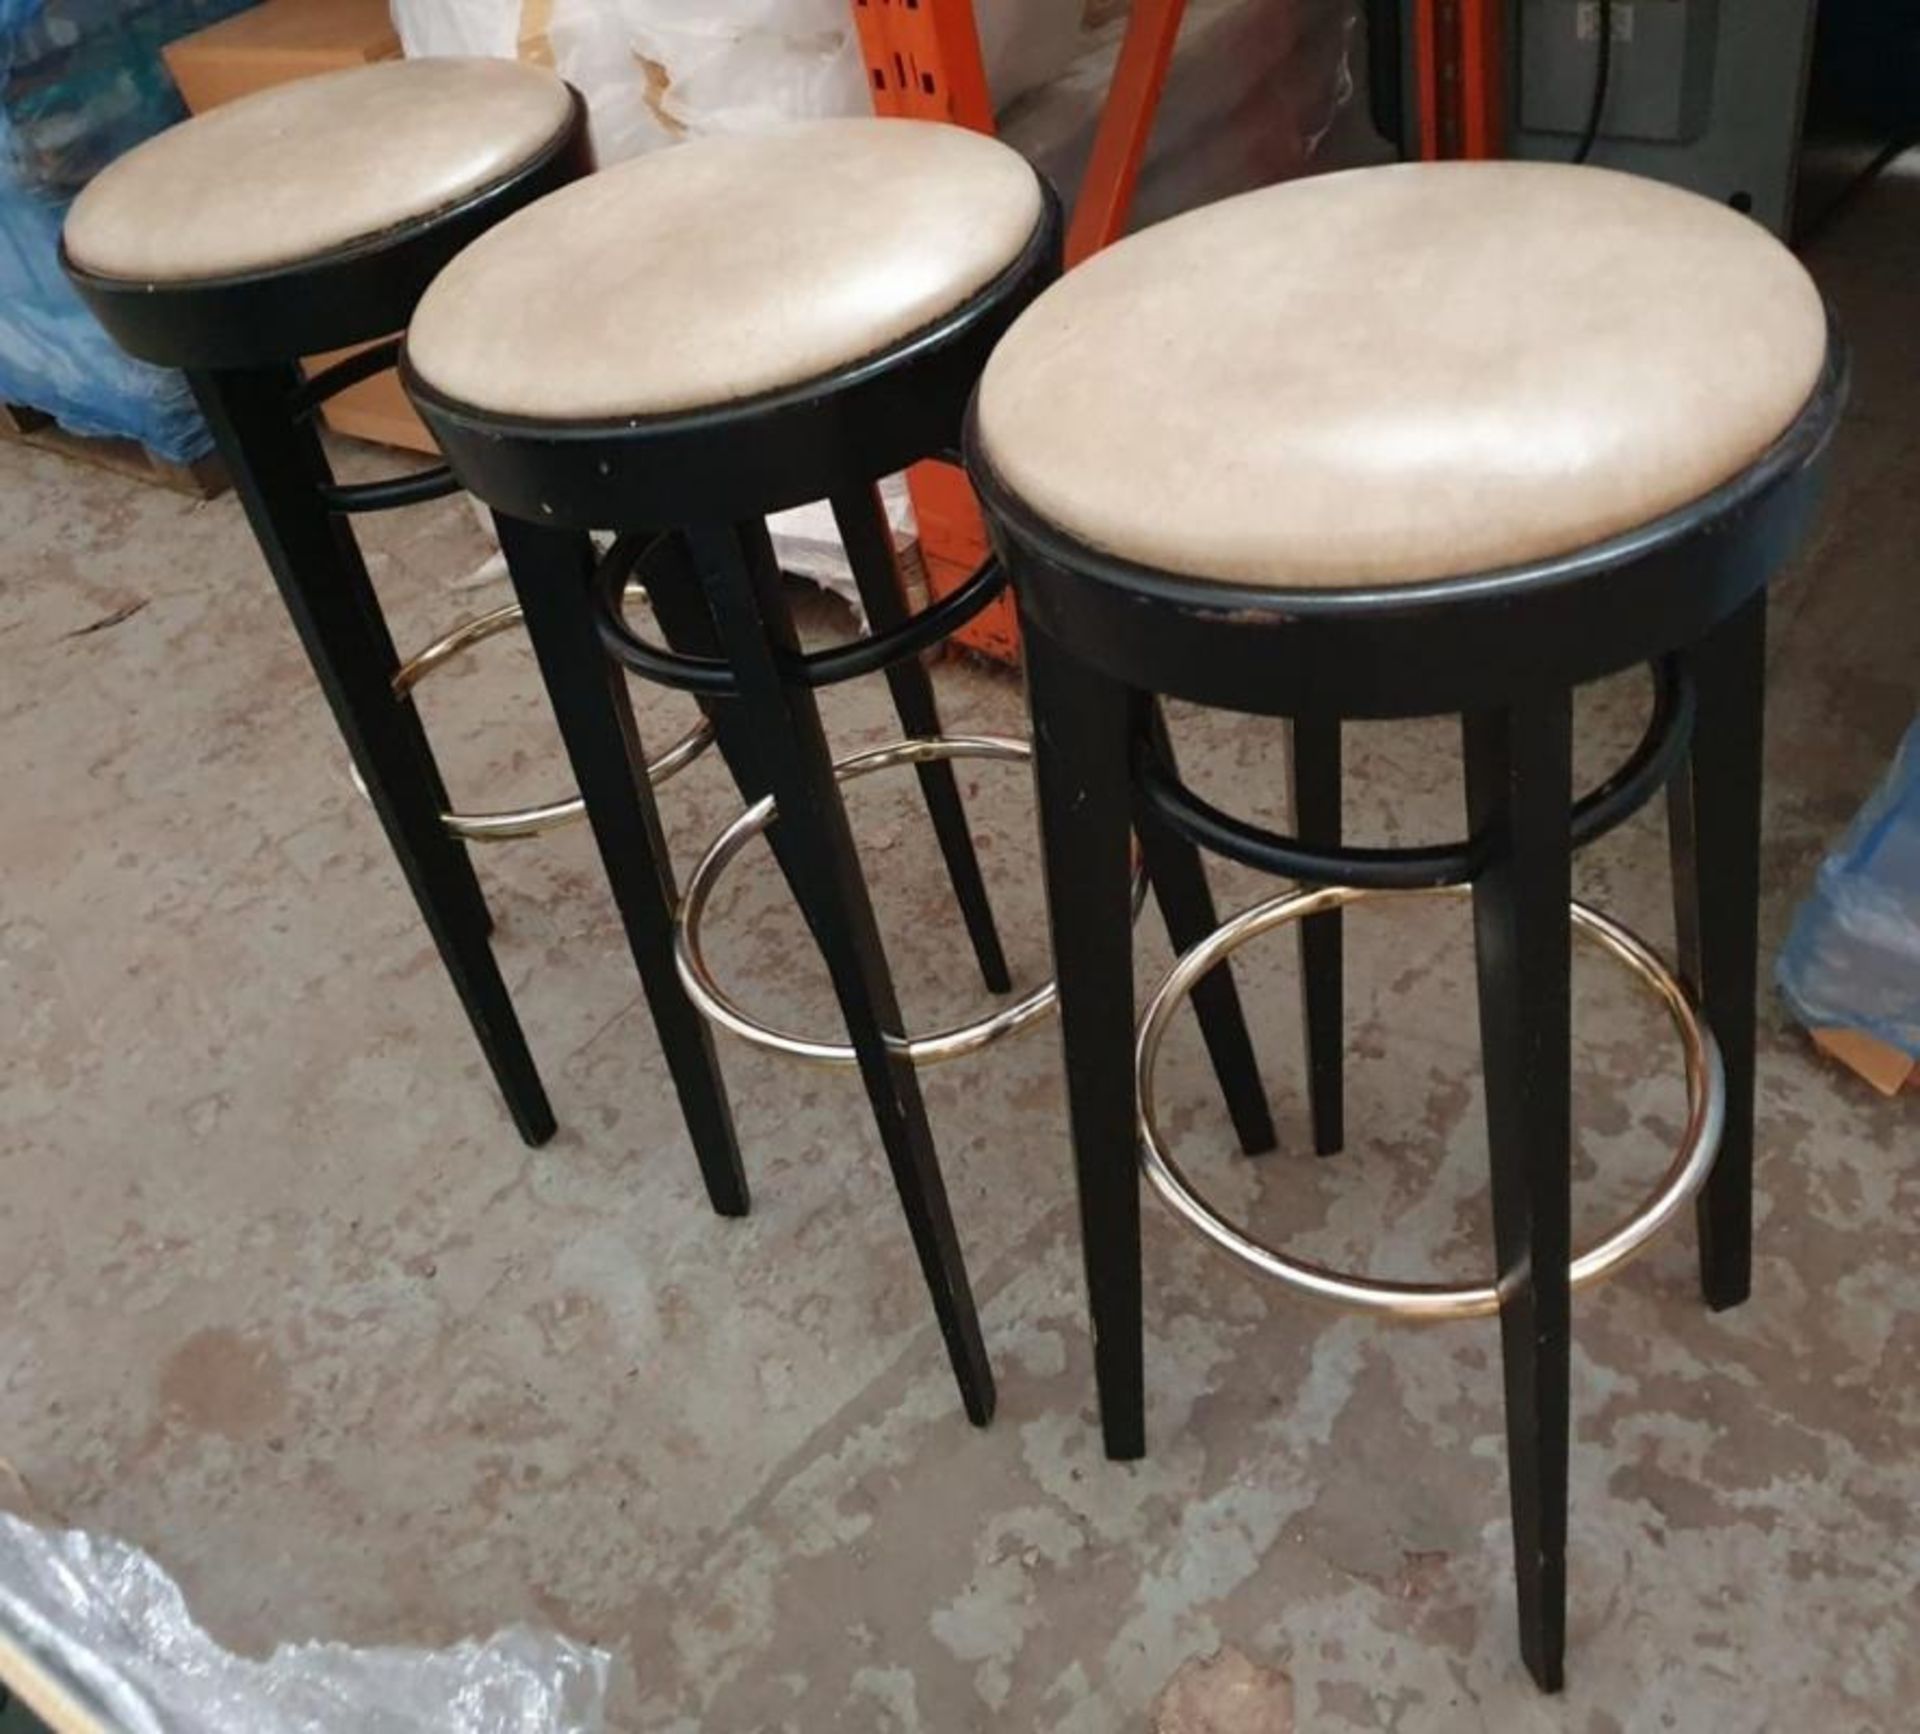 3 x Commercial Bar Stools - Taken From A Popular Patisserie In Good Condition - Height 82cm x diamet